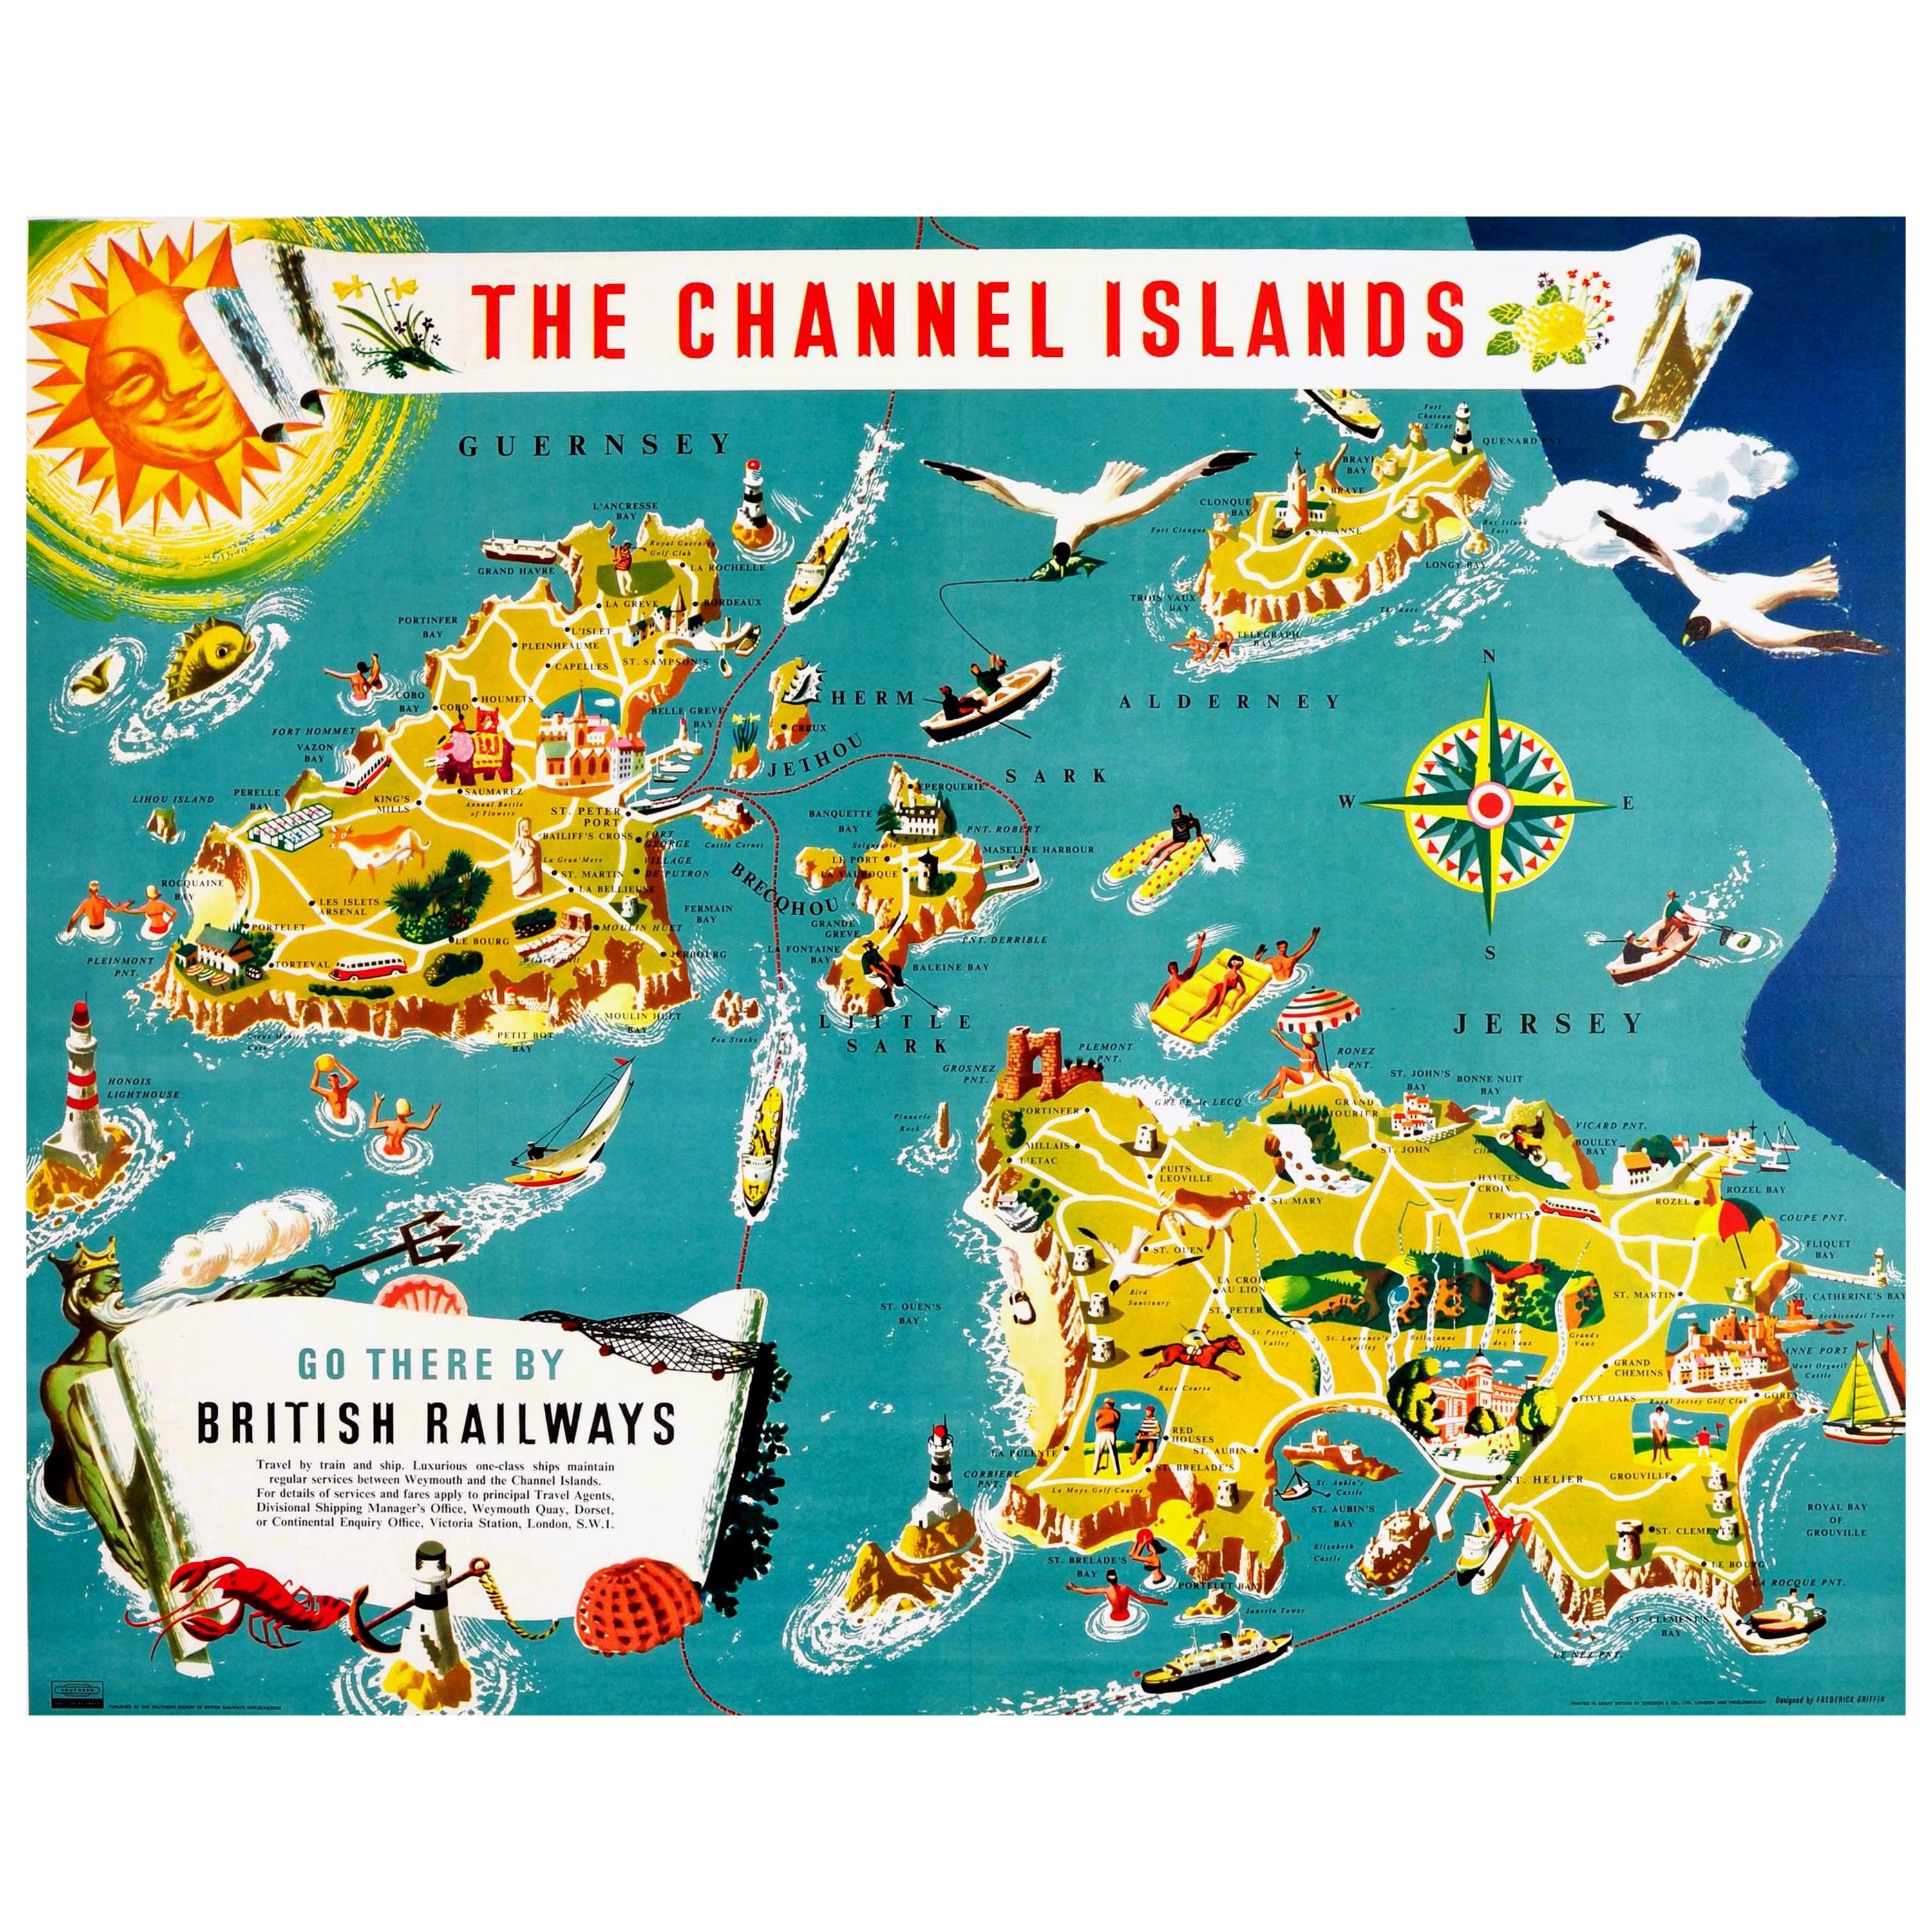 Original Vintage British Railways Poster Illustrated Map of the Channel Islands